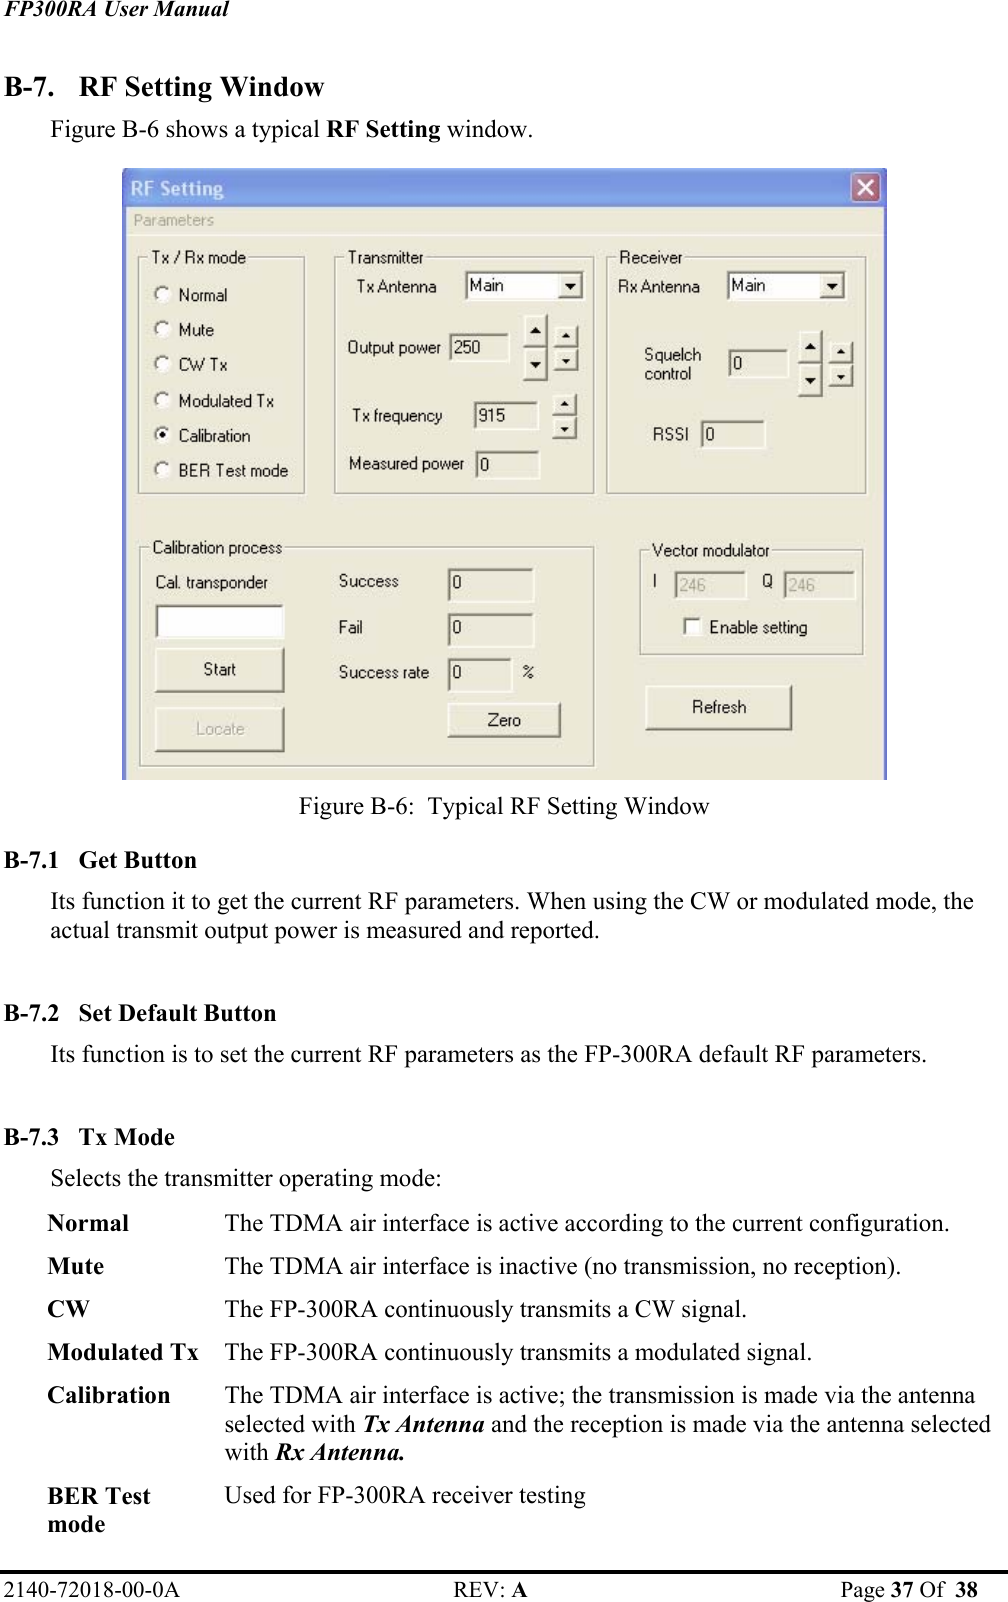 FP300RA User Manual 2140-72018-00-0A REV: A  Page 37 Of  38  B-7.  RF Setting Window  Figure B-6 shows a typical RF Setting window.  Figure B-6:  Typical RF Setting Window B-7.1 Get Button Its function it to get the current RF parameters. When using the CW or modulated mode, the actual transmit output power is measured and reported.  B-7.2 Set Default Button Its function is to set the current RF parameters as the FP-300RA default RF parameters.  B-7.3 Tx Mode Selects the transmitter operating mode: Normal  The TDMA air interface is active according to the current configuration. Mute  The TDMA air interface is inactive (no transmission, no reception). CW  The FP-300RA continuously transmits a CW signal. Modulated Tx  The FP-300RA continuously transmits a modulated signal. Calibration  The TDMA air interface is active; the transmission is made via the antenna selected with Tx Antenna and the reception is made via the antenna selected with Rx Antenna. BER Test mode Used for FP-300RA receiver testing 